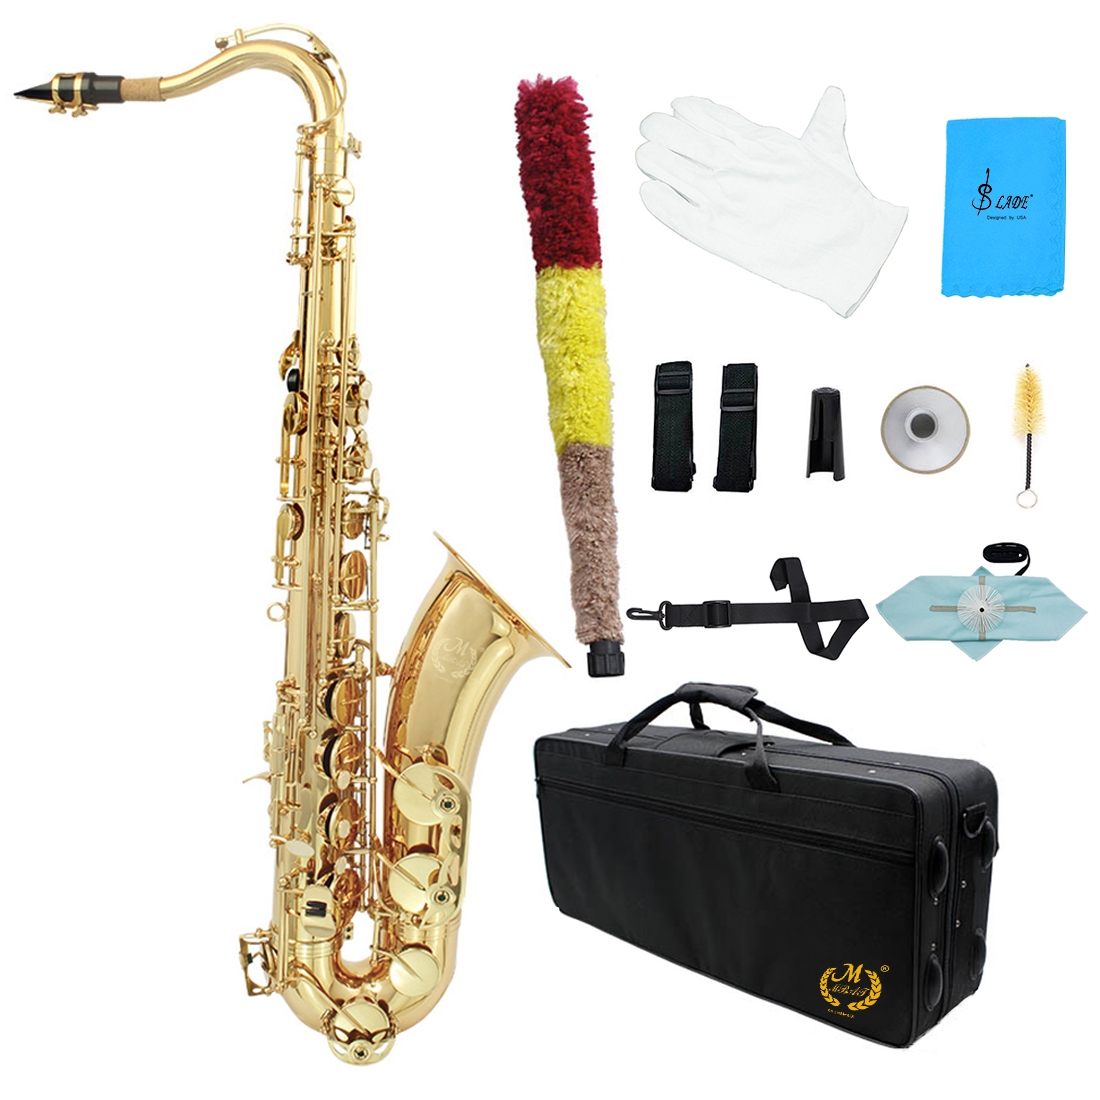 Mebite Brass Bb Tenor Saxophone Sax Carved Pattern Pearl White Shell Buttons Wind Instrument with Case Gloves Cleaning Cloth